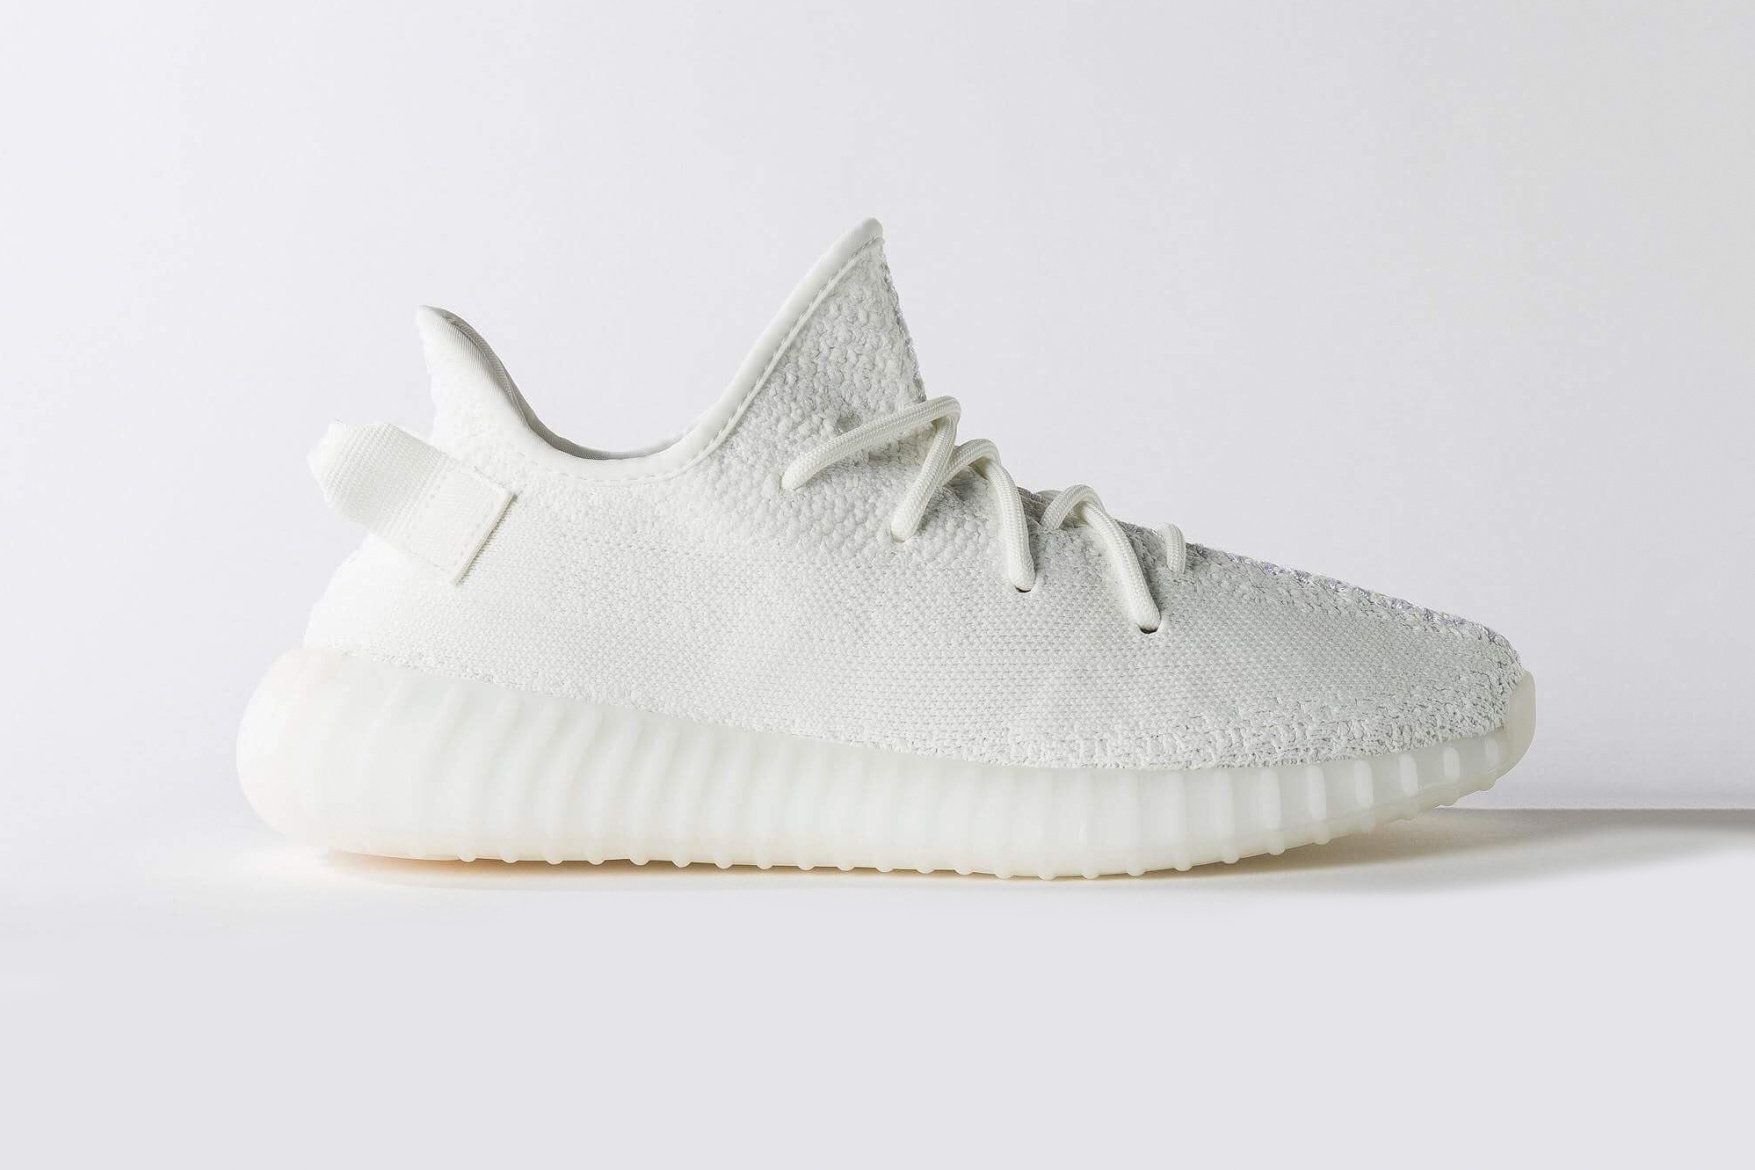 The first pictures of the adidas Yeezy BOOST 350 V2 “Cream White” appeared